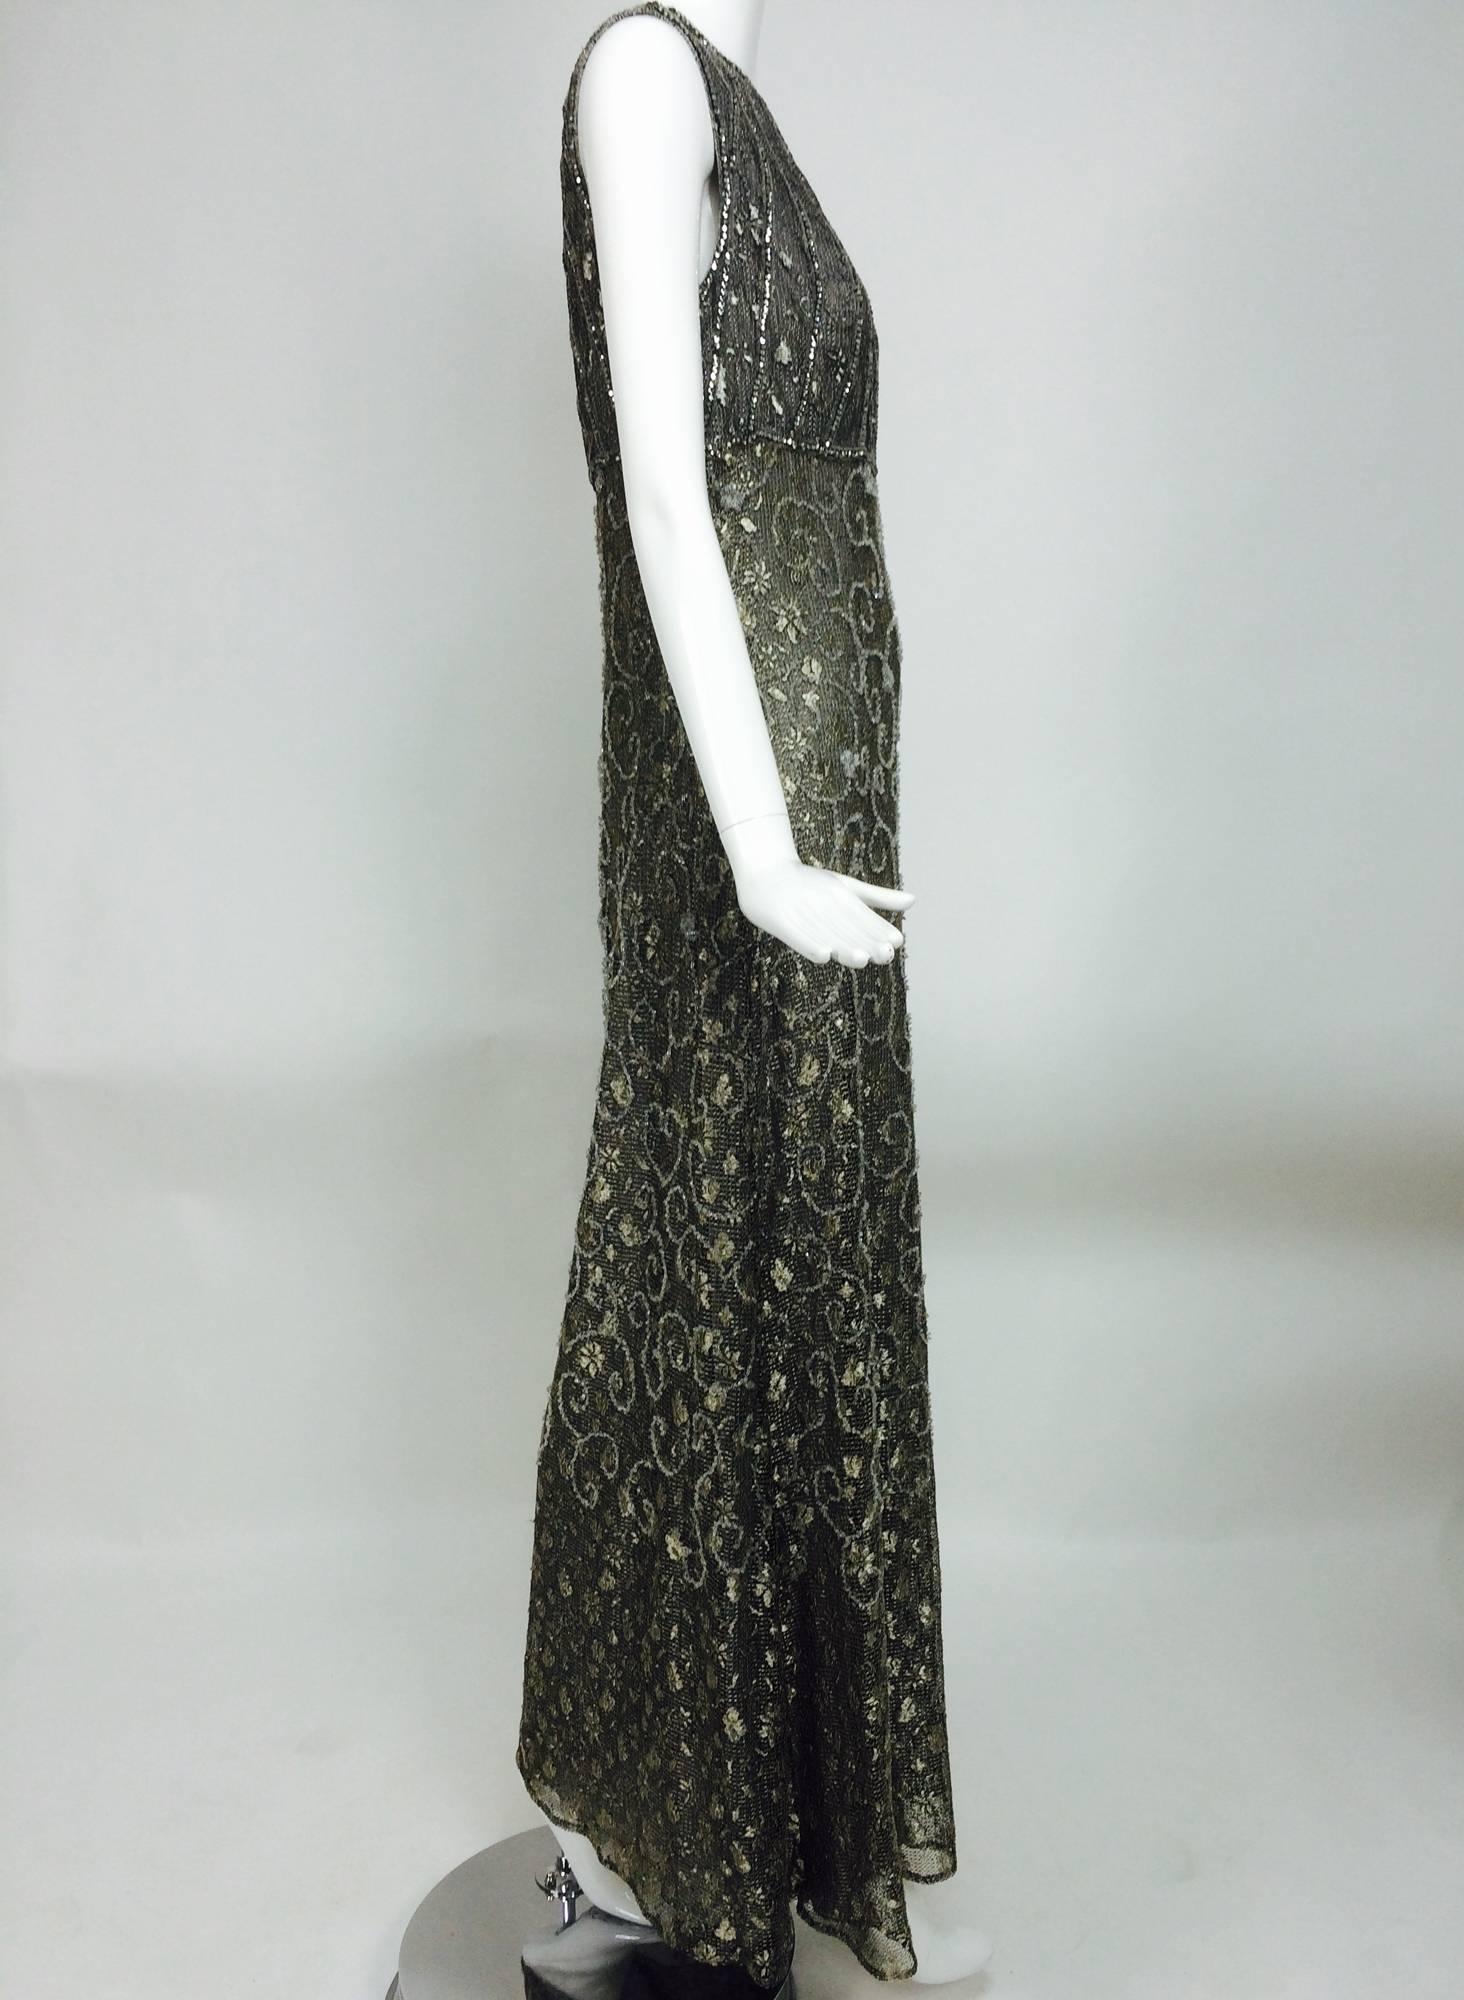 Badgley Mischka embroidered & beaded silver metallic lace gown...Jewel neckline fitted high waist bodice gown, long skirt is fitted through the torso and flares at the hem...The fabric is beautiful, silver lace that is embroidered in crystal beaded